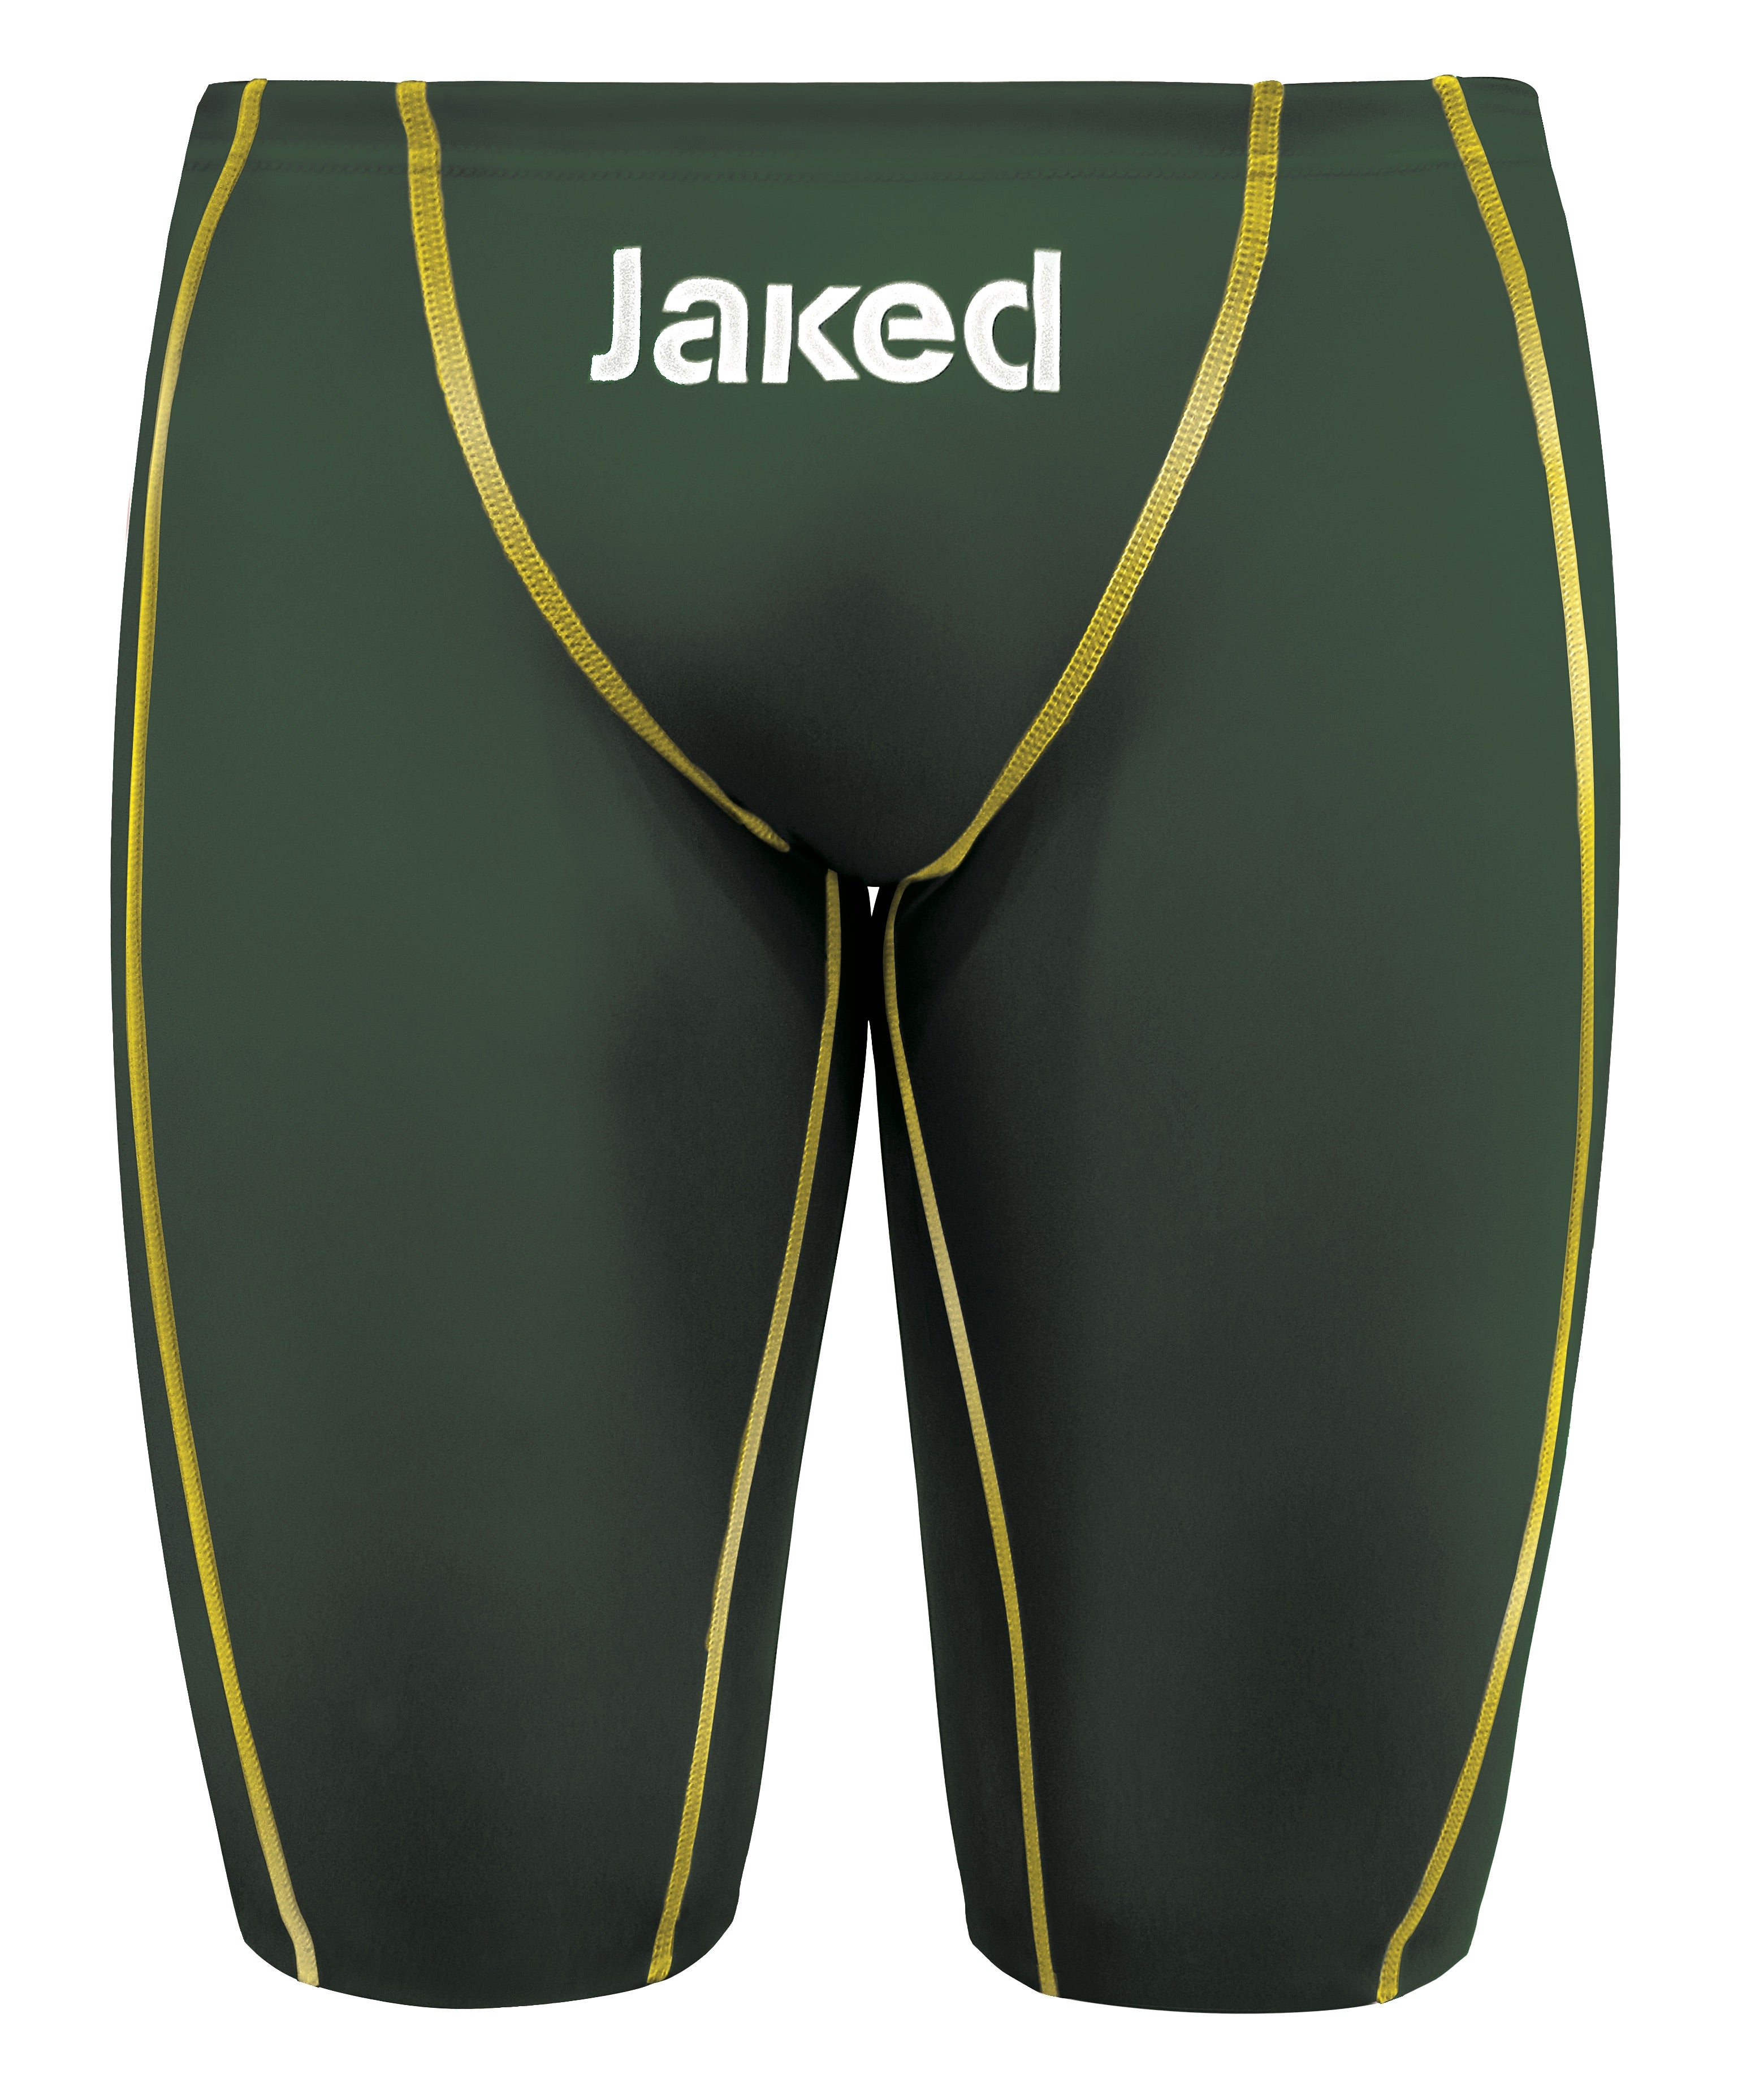 Men's JALPHA Competition Swimsuit Jammer, Jaked US Store